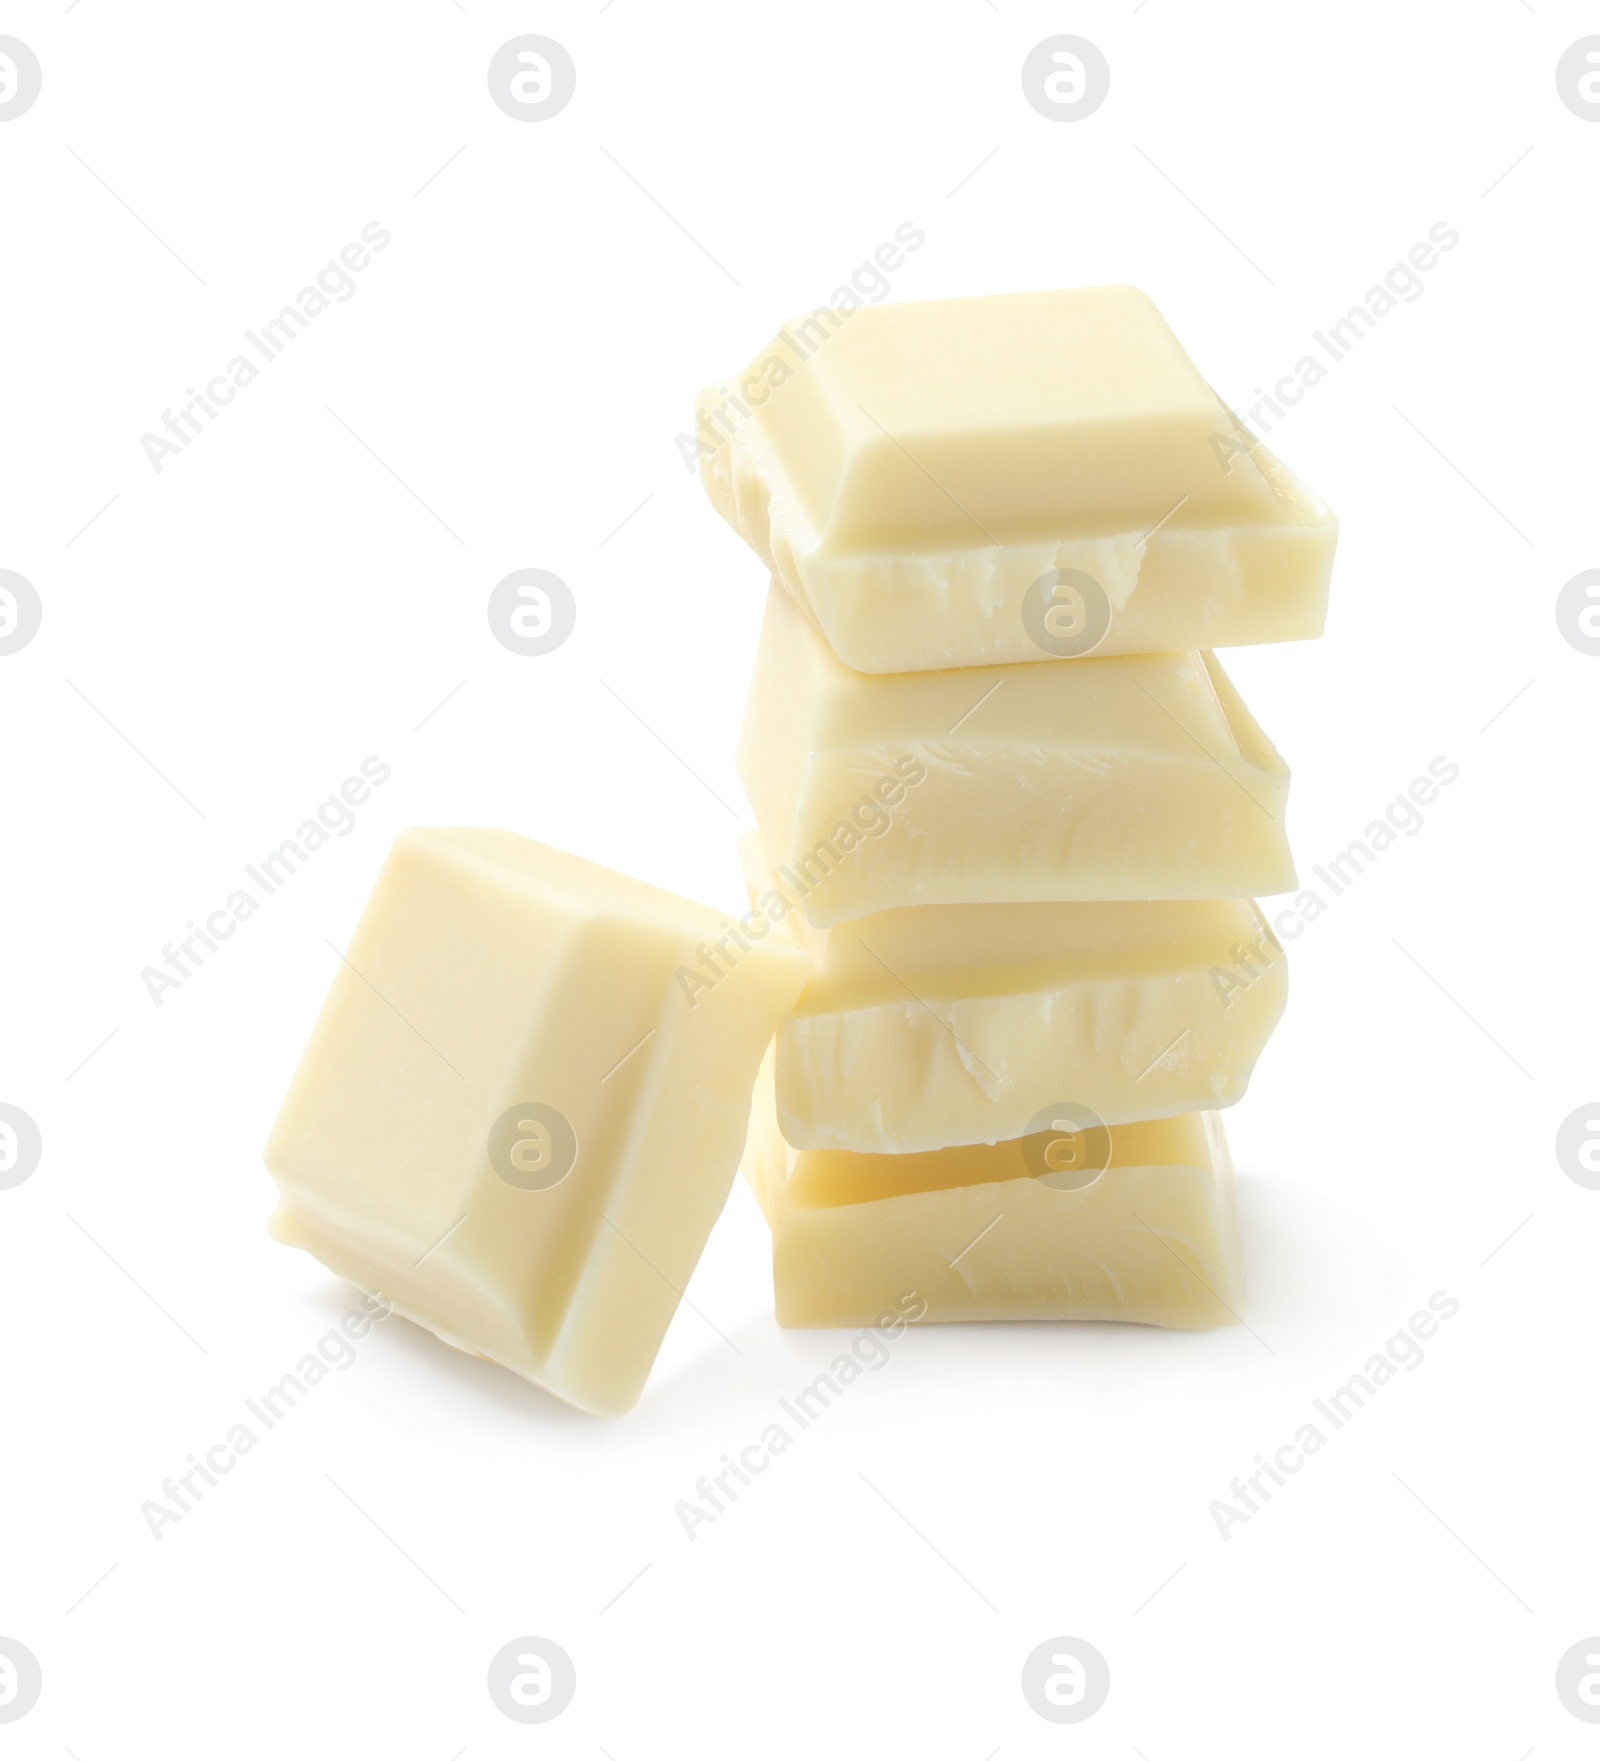 Photo of Pieces of delicious chocolate bar isolated on white